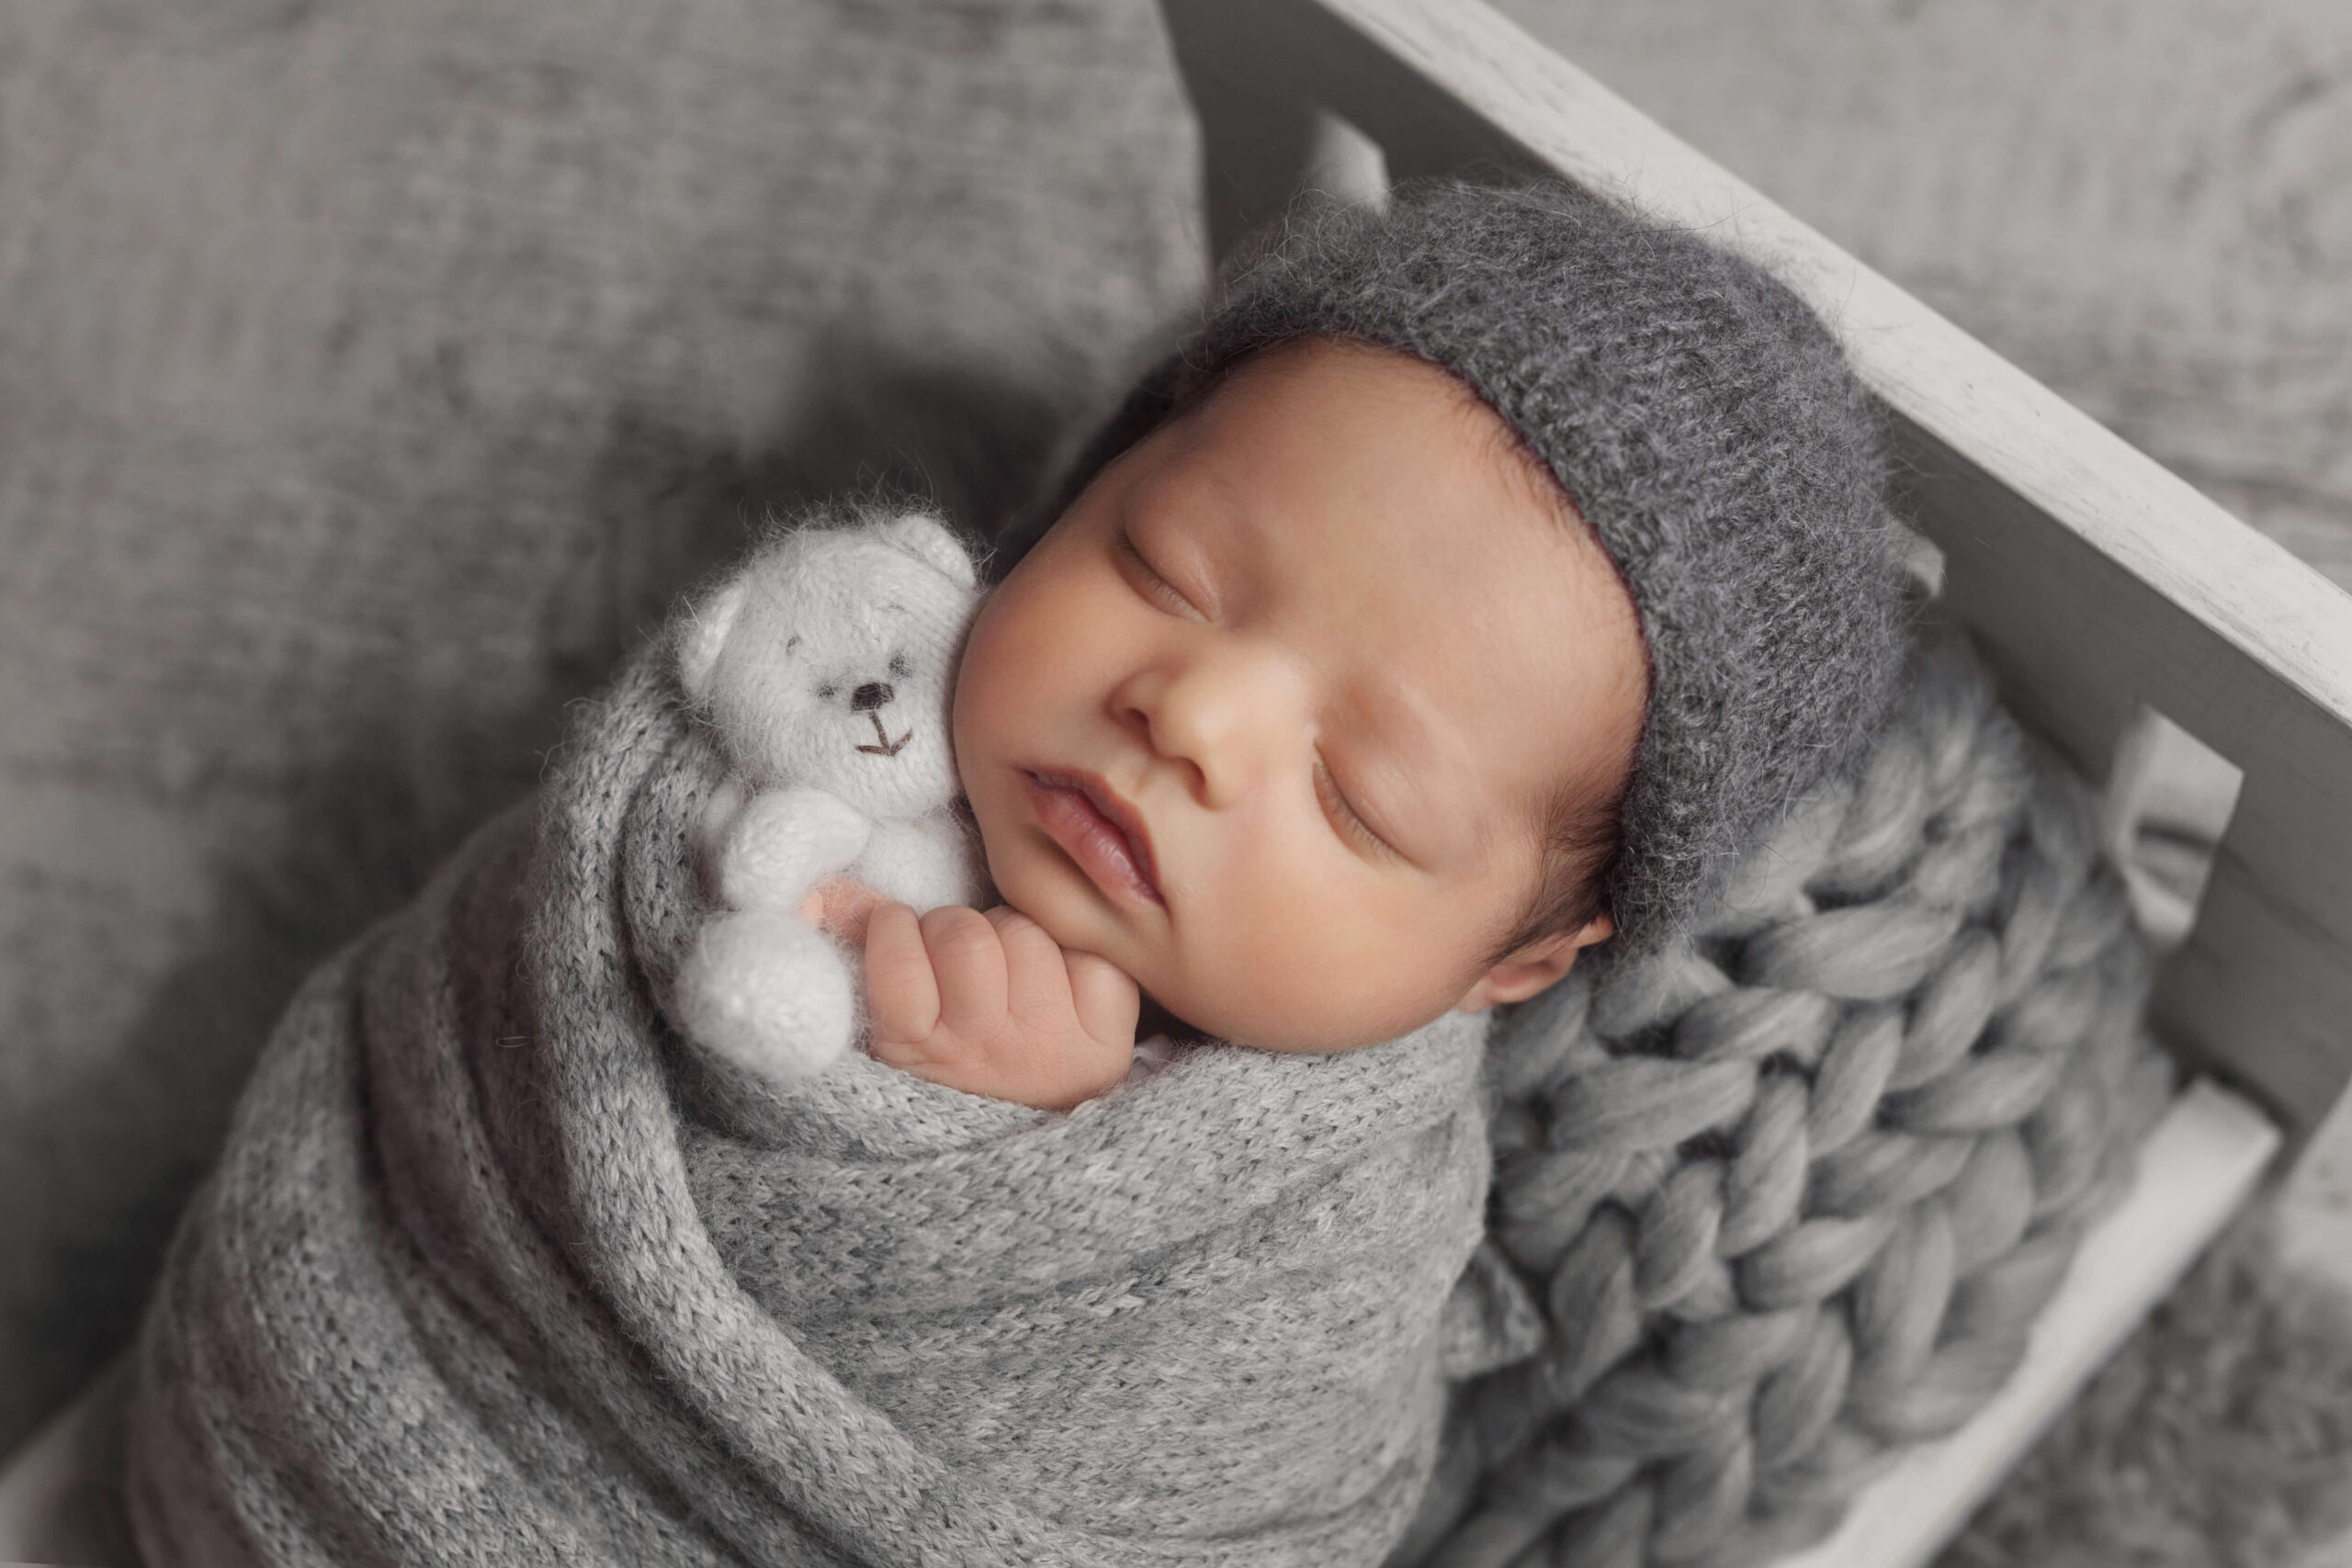 newborn baby sleeping while swaddled in a grey knit wrap wearing grey sleepy cap holding a white knit bear while laying in a white wooden bed, soothing babies during photo session, Serling VA newborn photographer